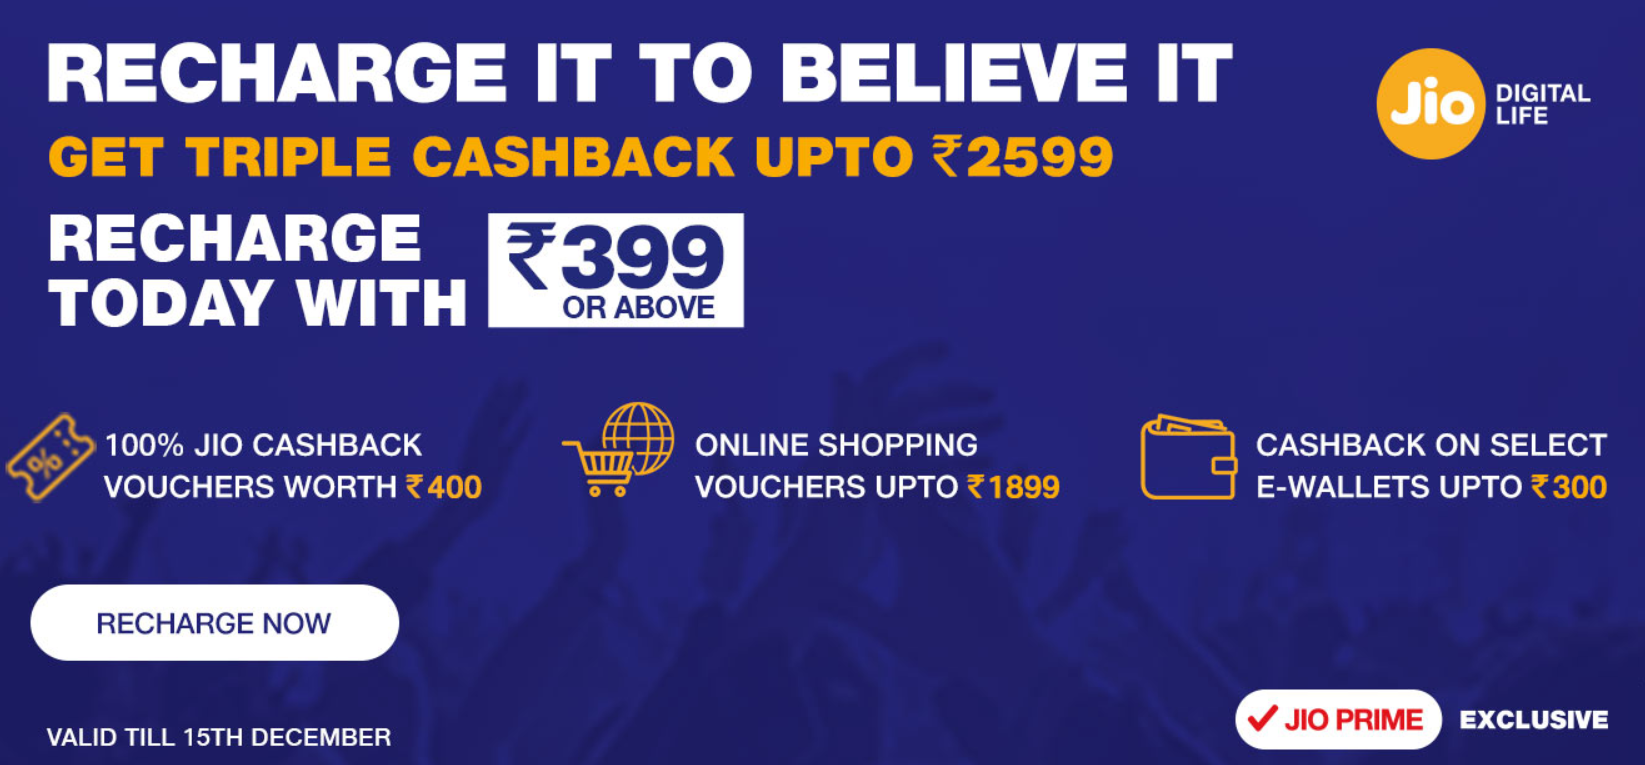 You can use Reliance Jio's Triple cashback offer until December 15 5